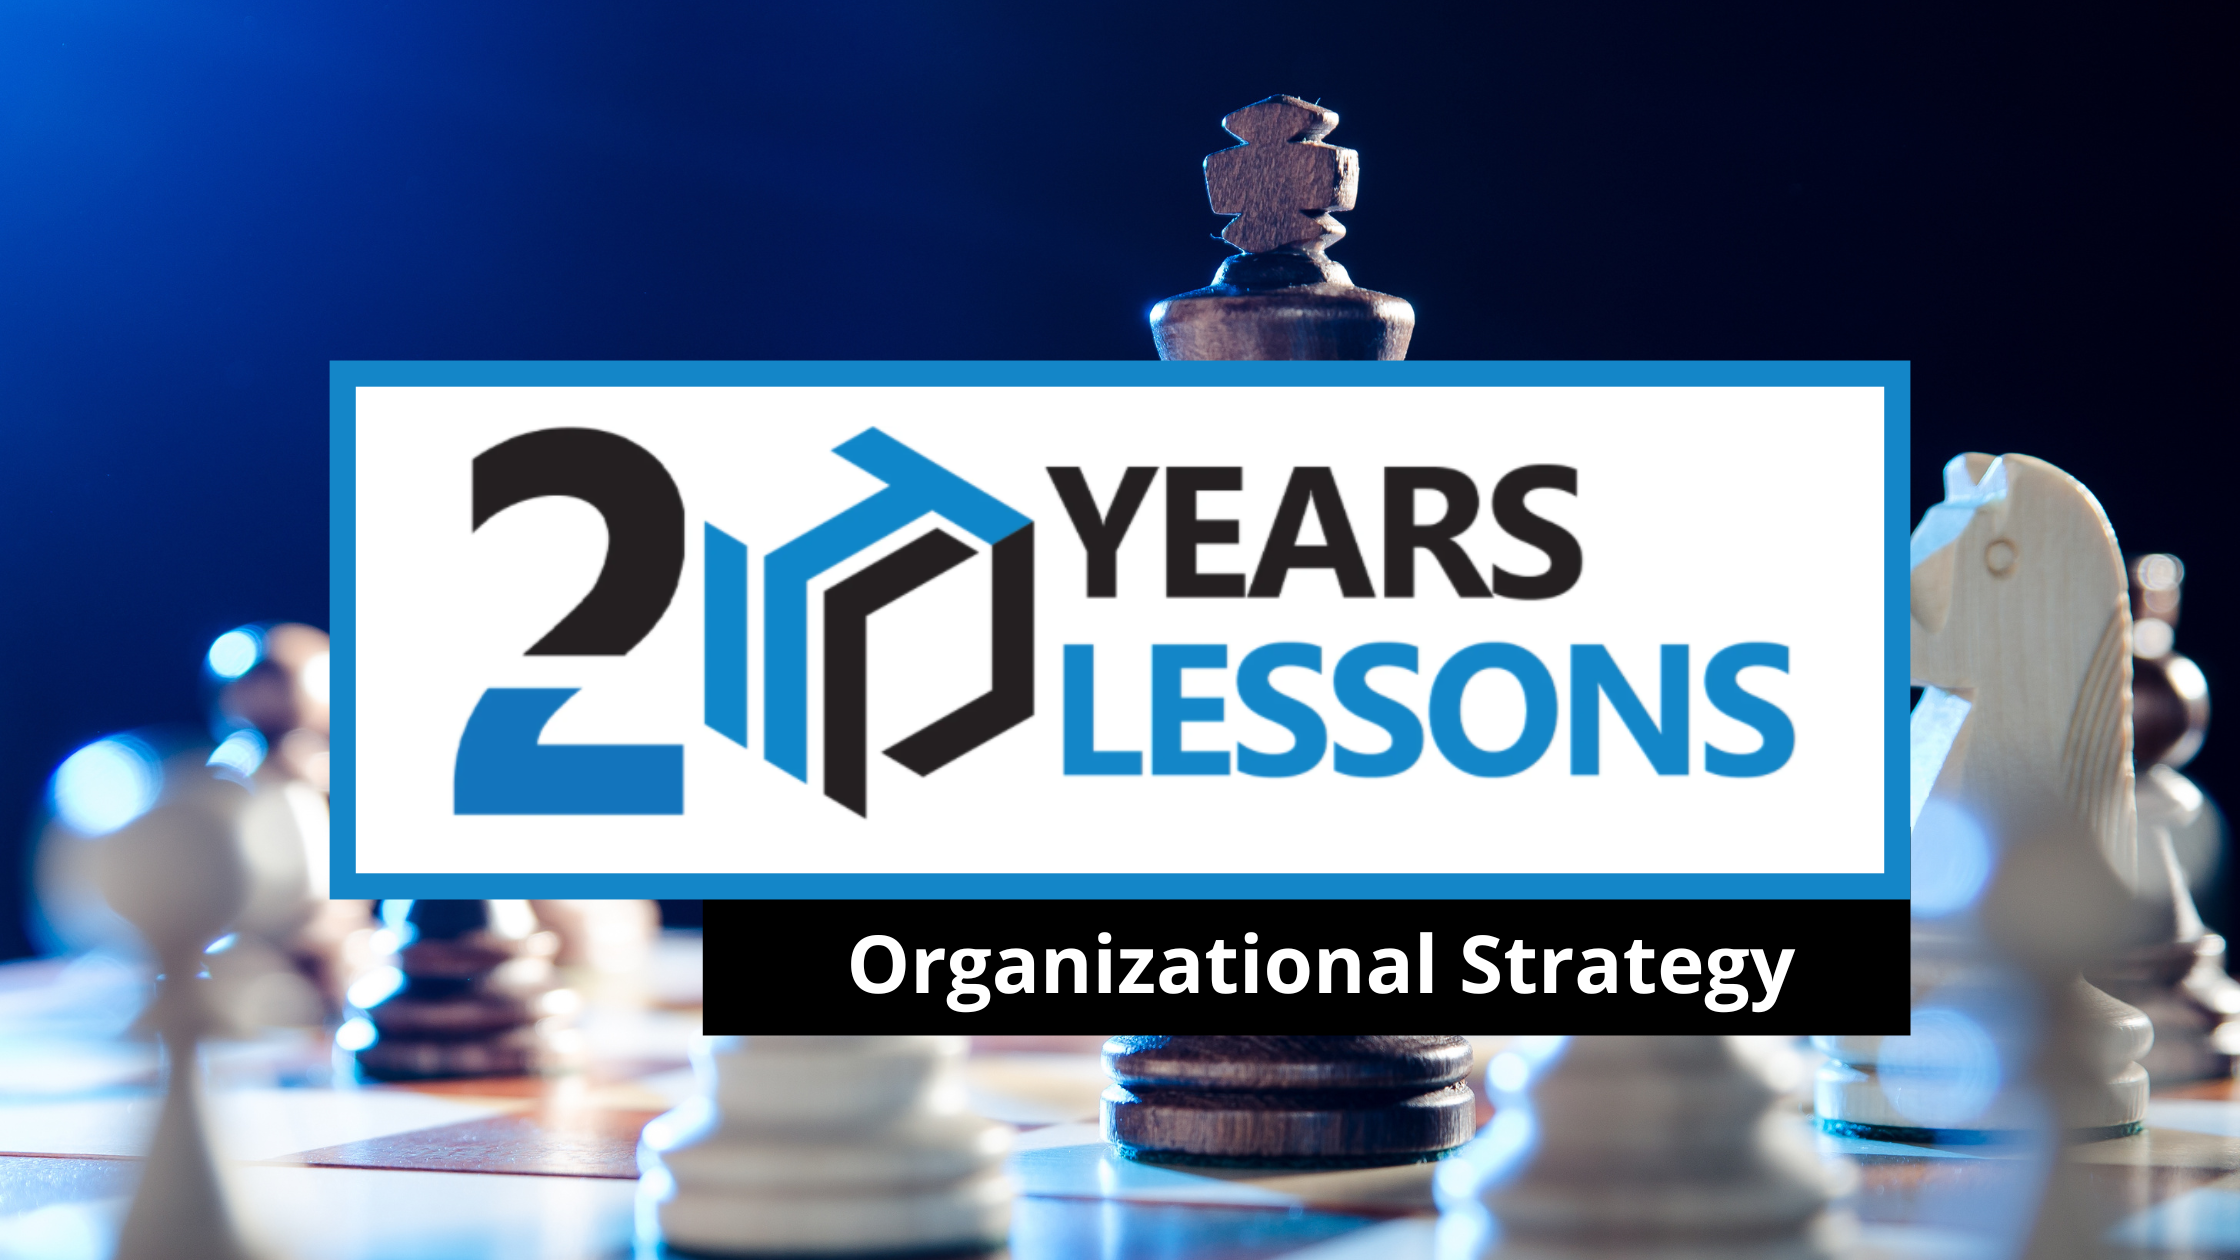 Organizational Strategy | 20 Years, 20 Lessons